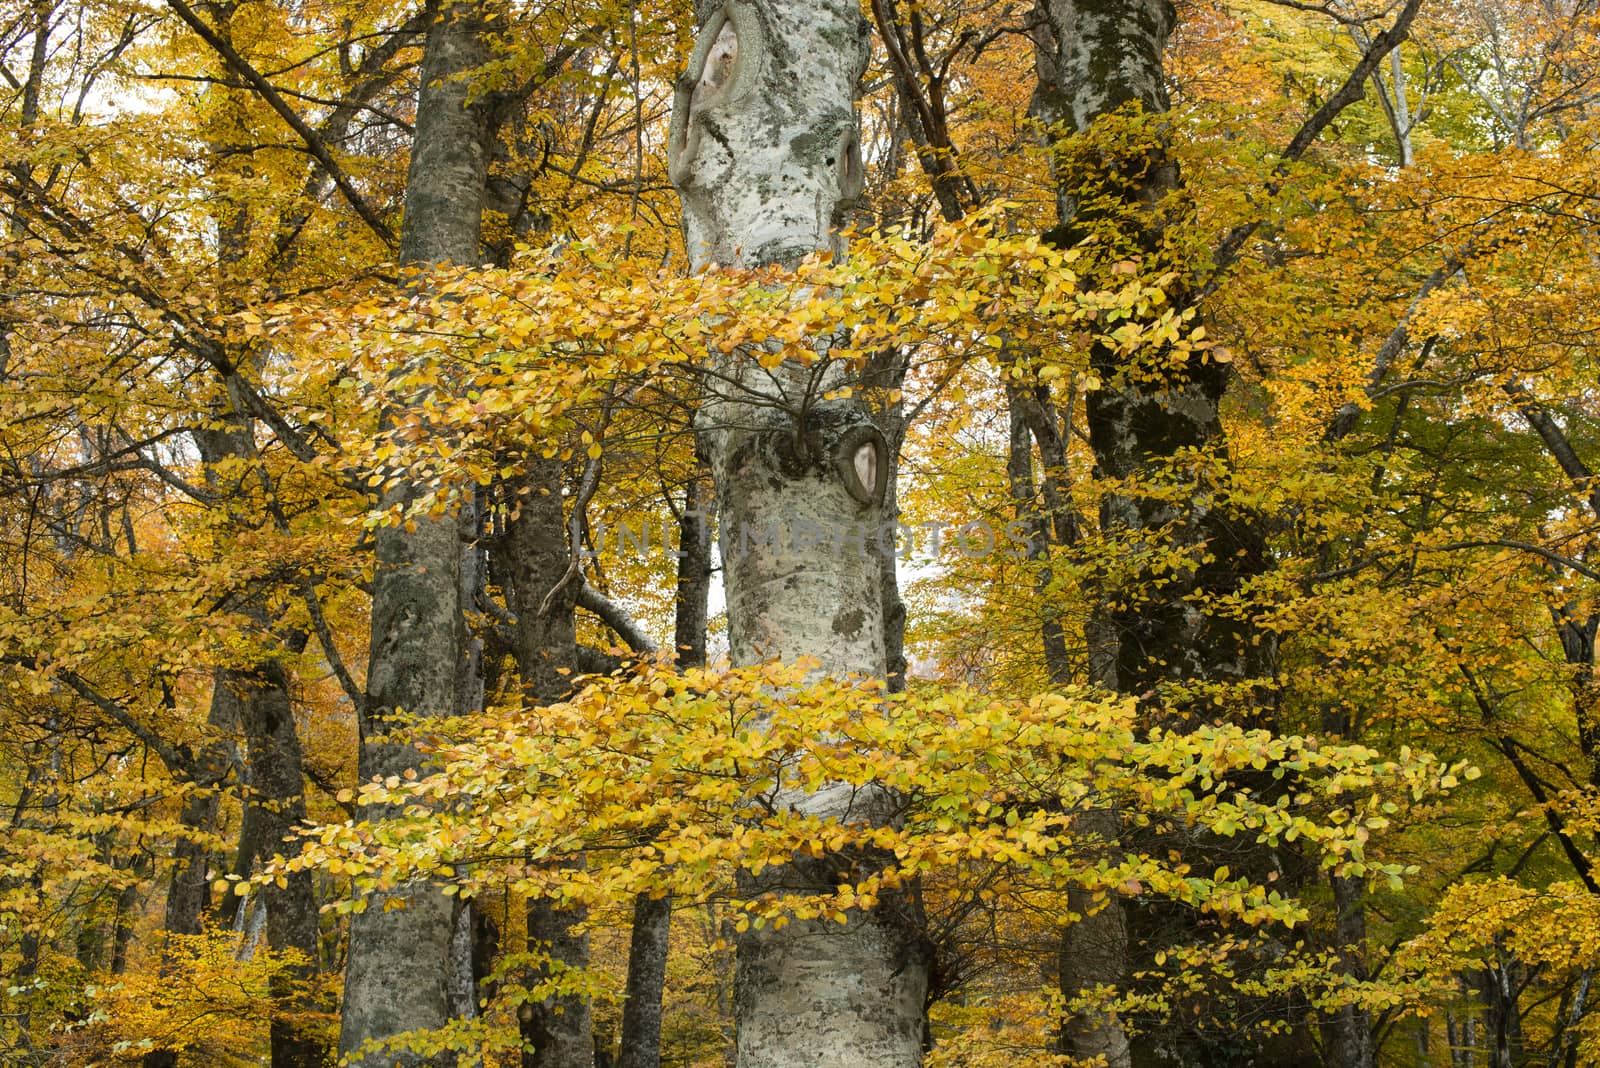 Ancient beech tree forest in Italy, Mount Cimino, UNESCO World Heritage Nature Site